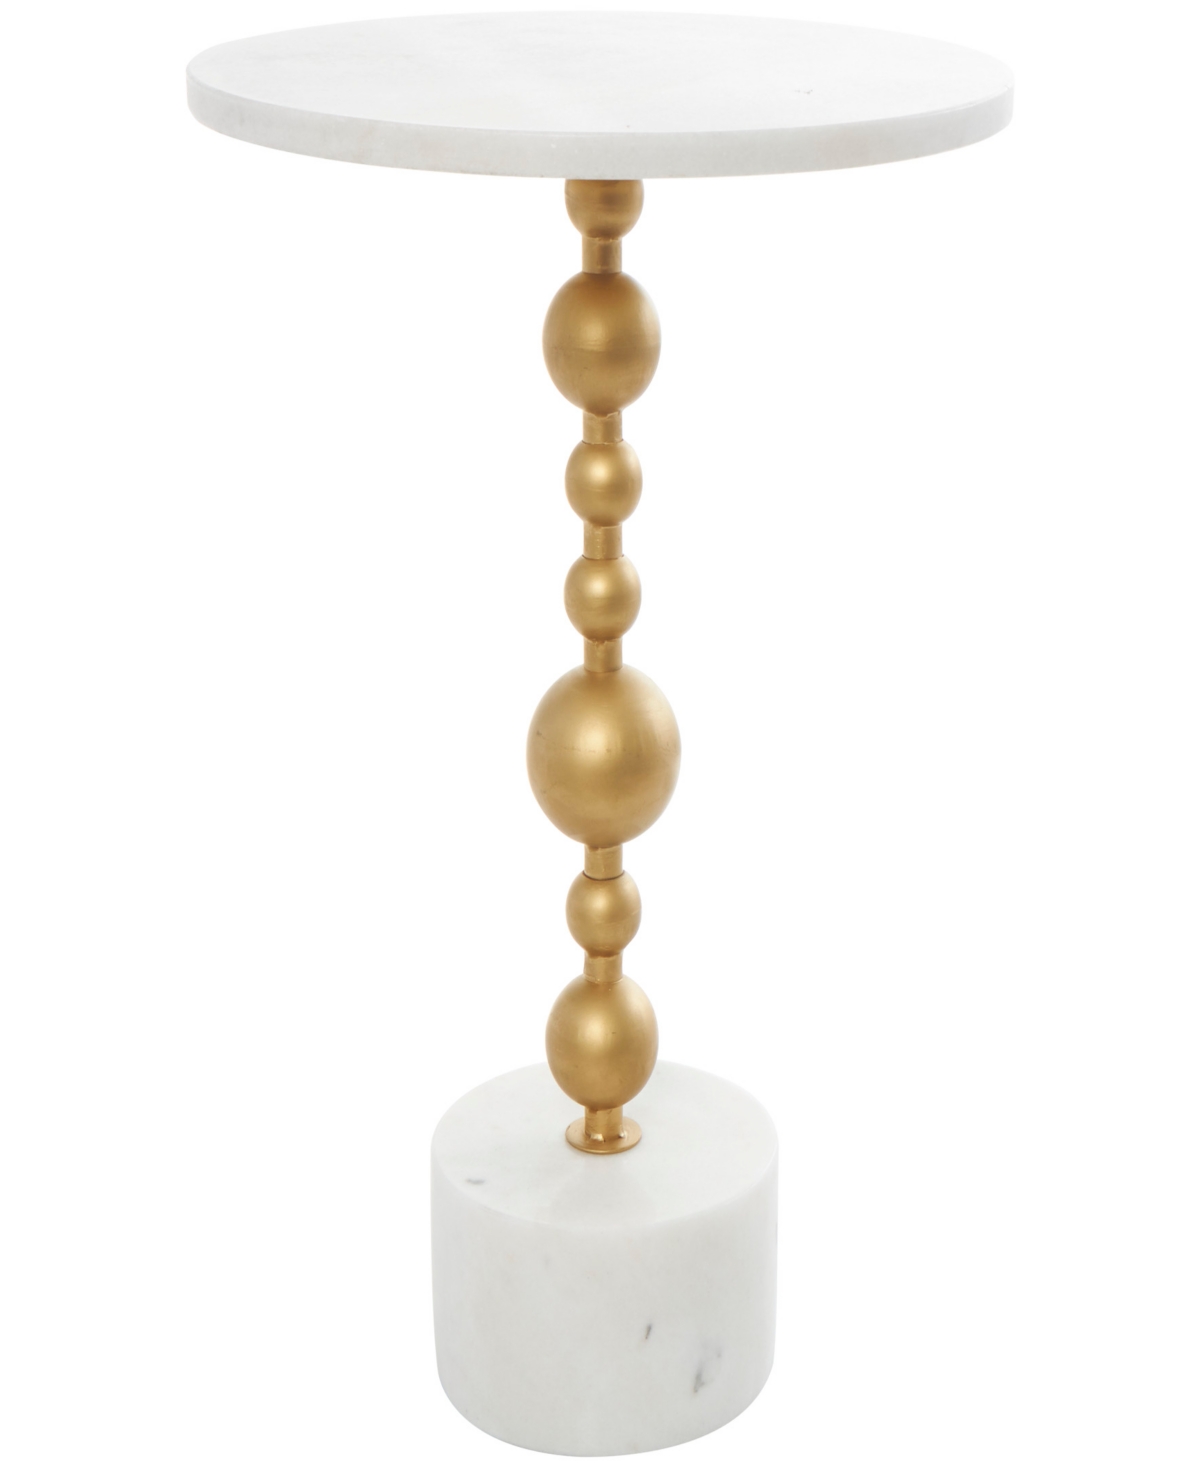 Rosemary Lane 16" X 16" X 23" Marble Geometric Gold-tone Metal Bubble Stand Accent Table In White